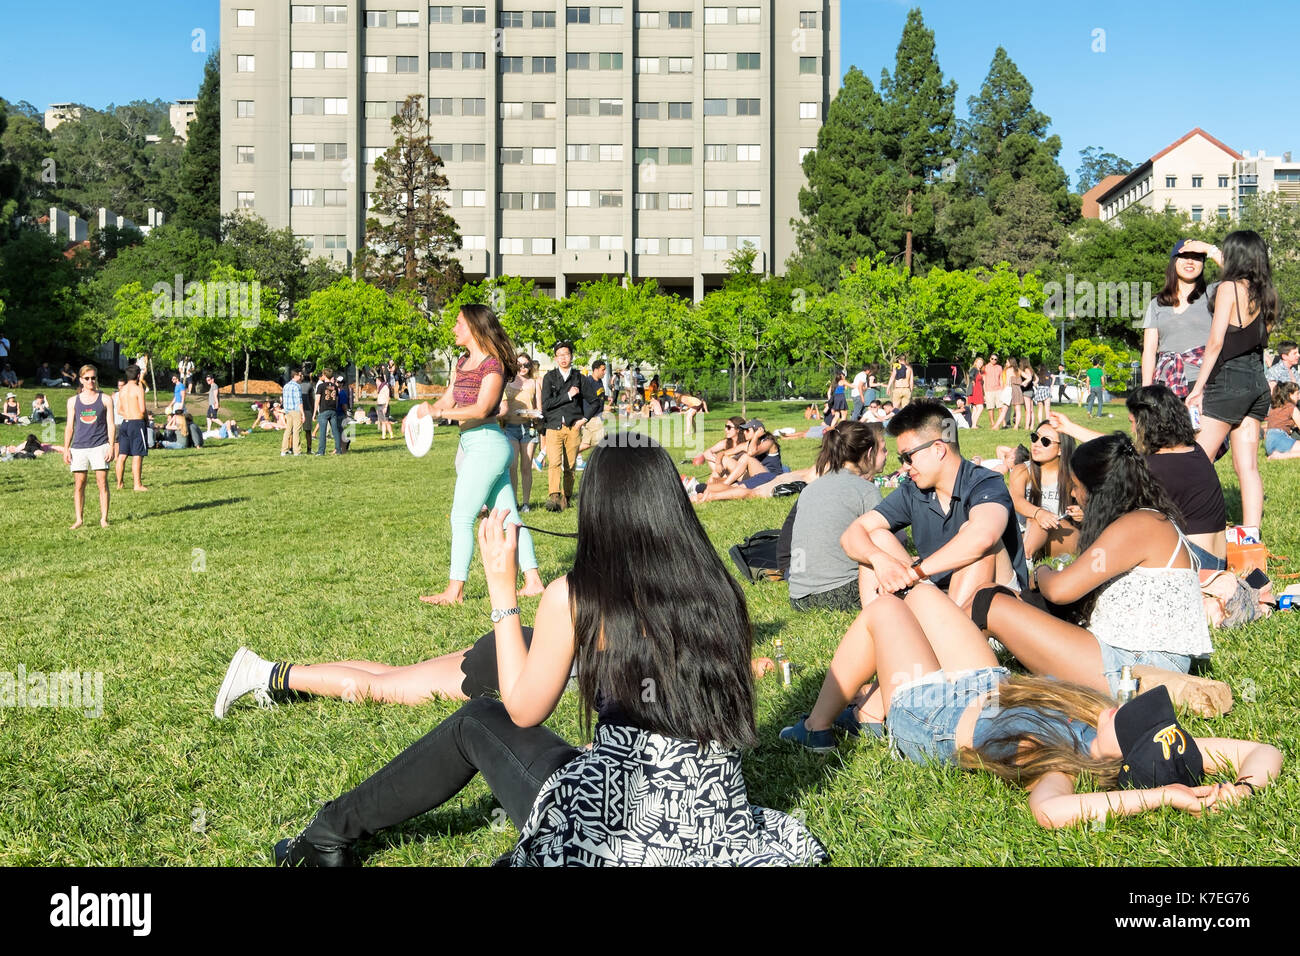 Students at the University of California Berkeley campus enjoying a warm spring day outdoors on the grass. Stock Photo